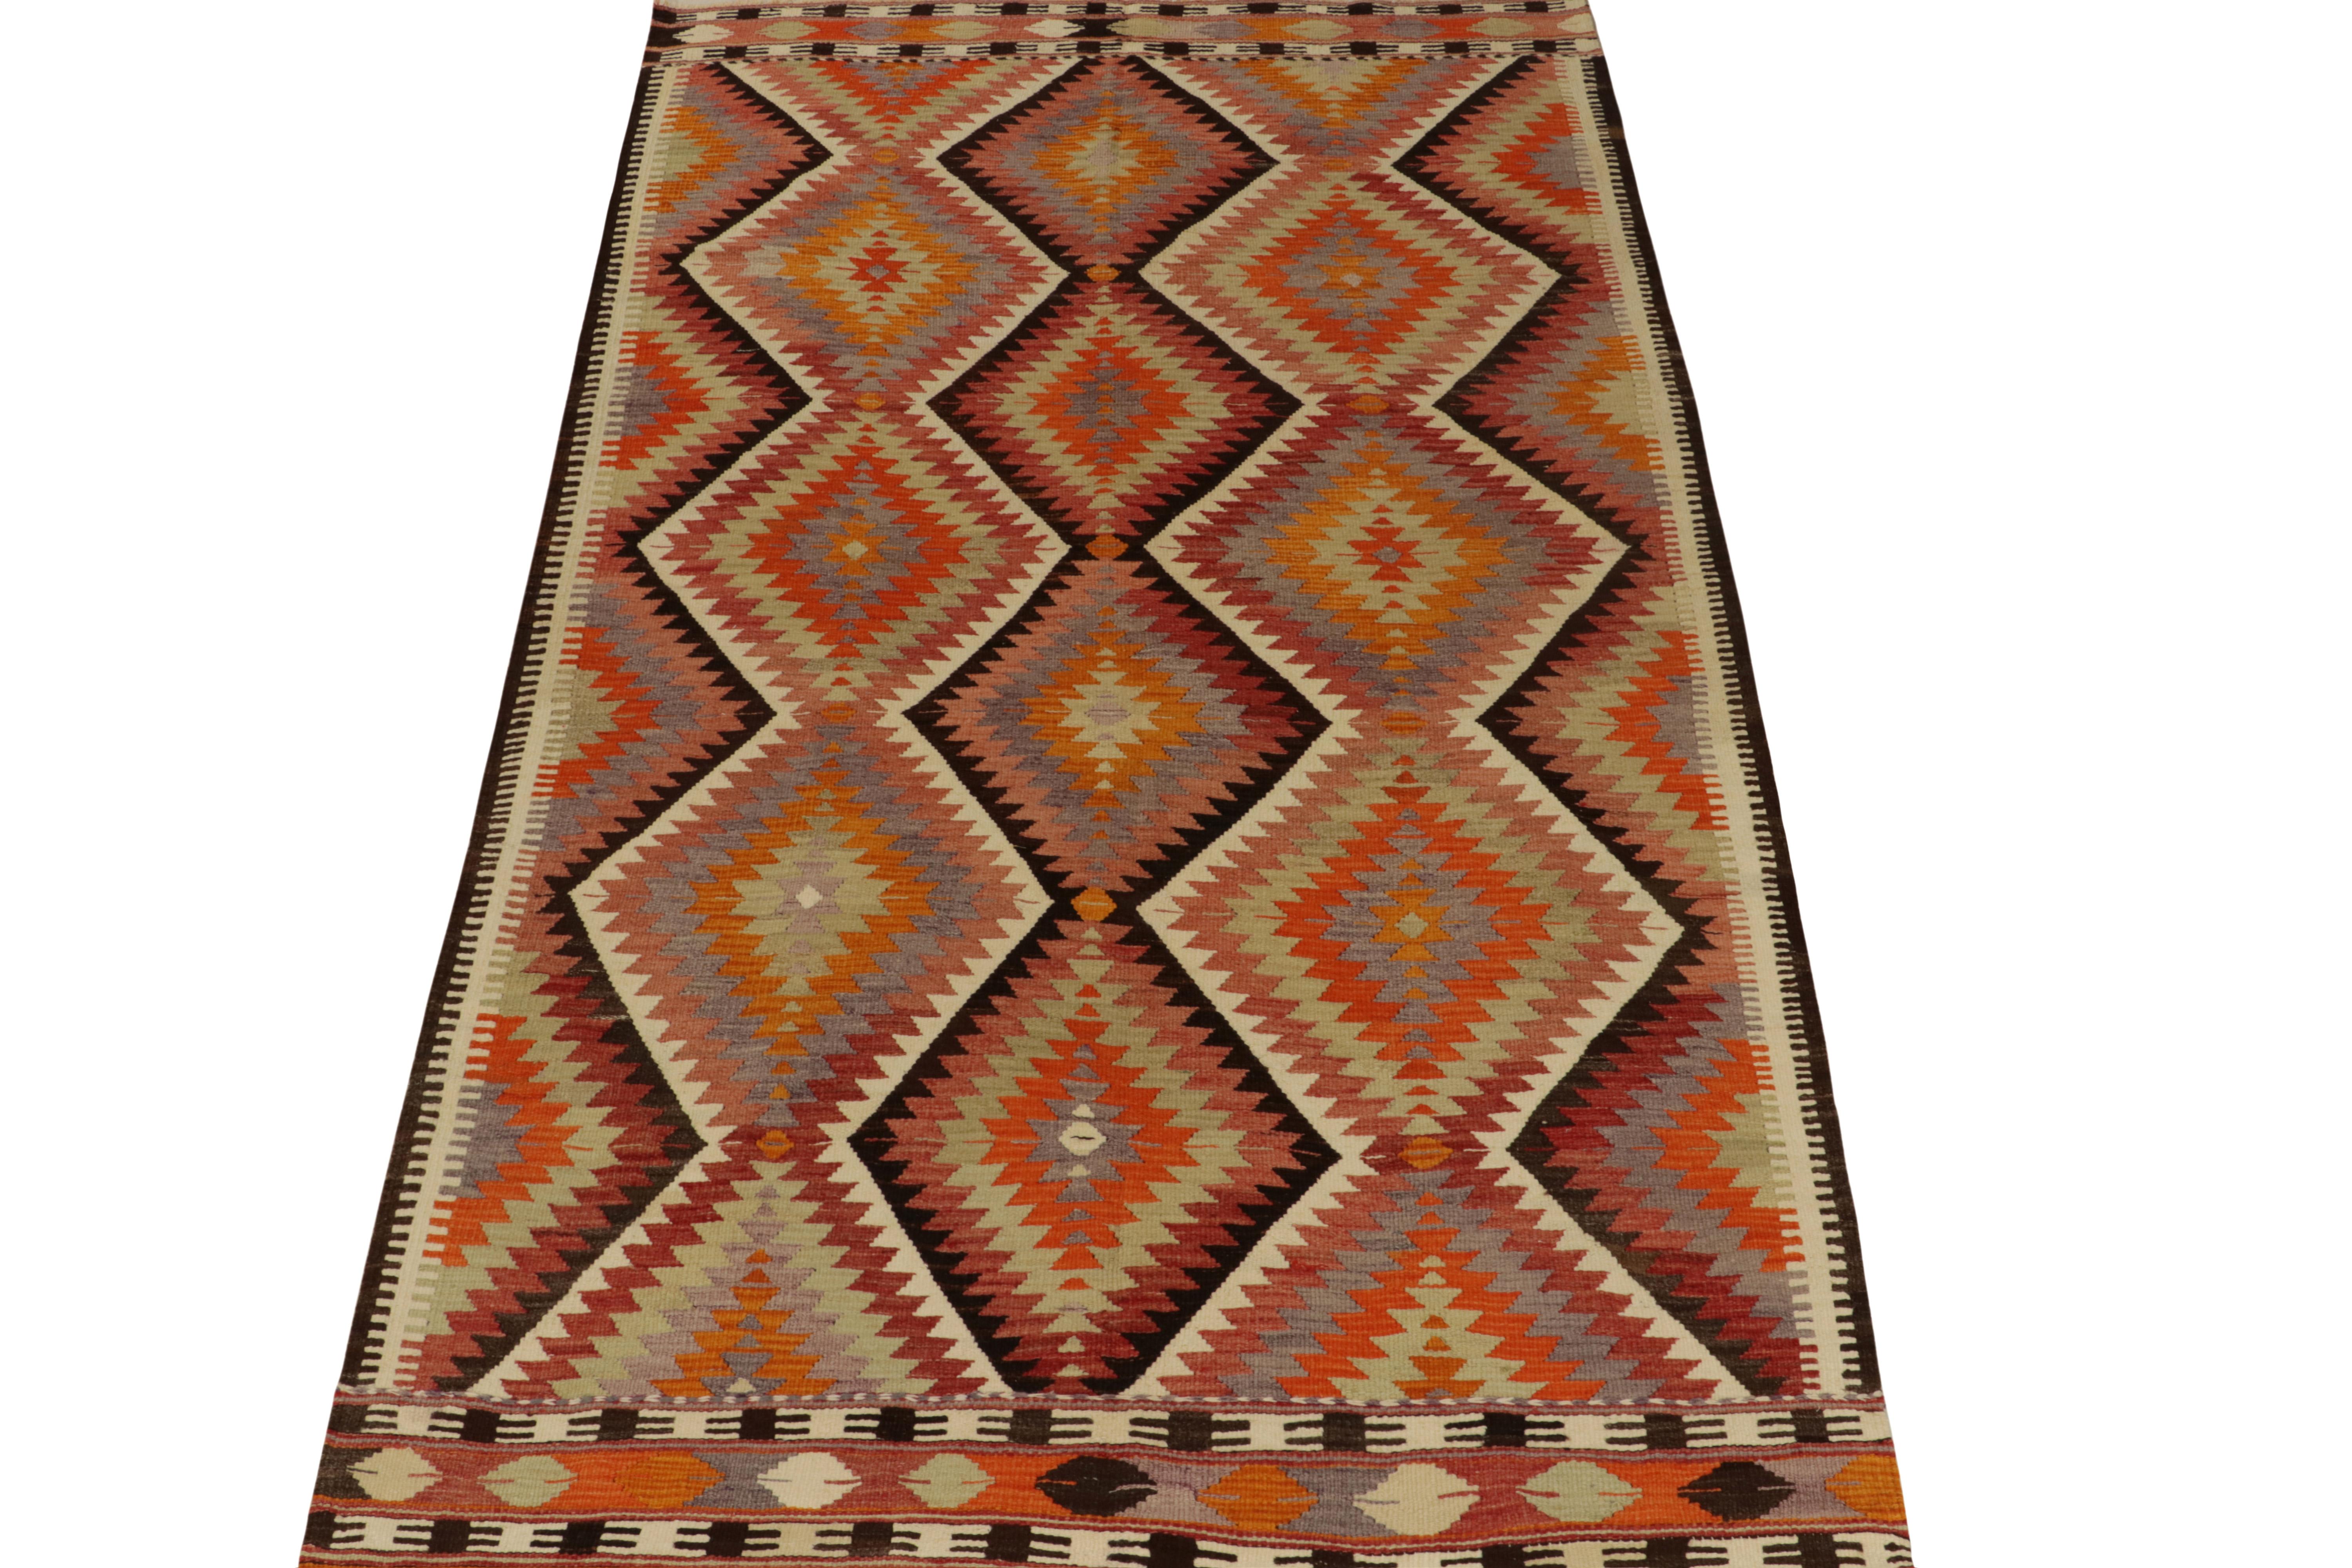 Believed to hail from Antalya circa 1950-1960, a rare Turkish kilim rug exemplifying mid century tribal sensibilities. 

Handwoven in wool, the sharp geometric pattern revels with the most unusual green and orange combination in the colorway